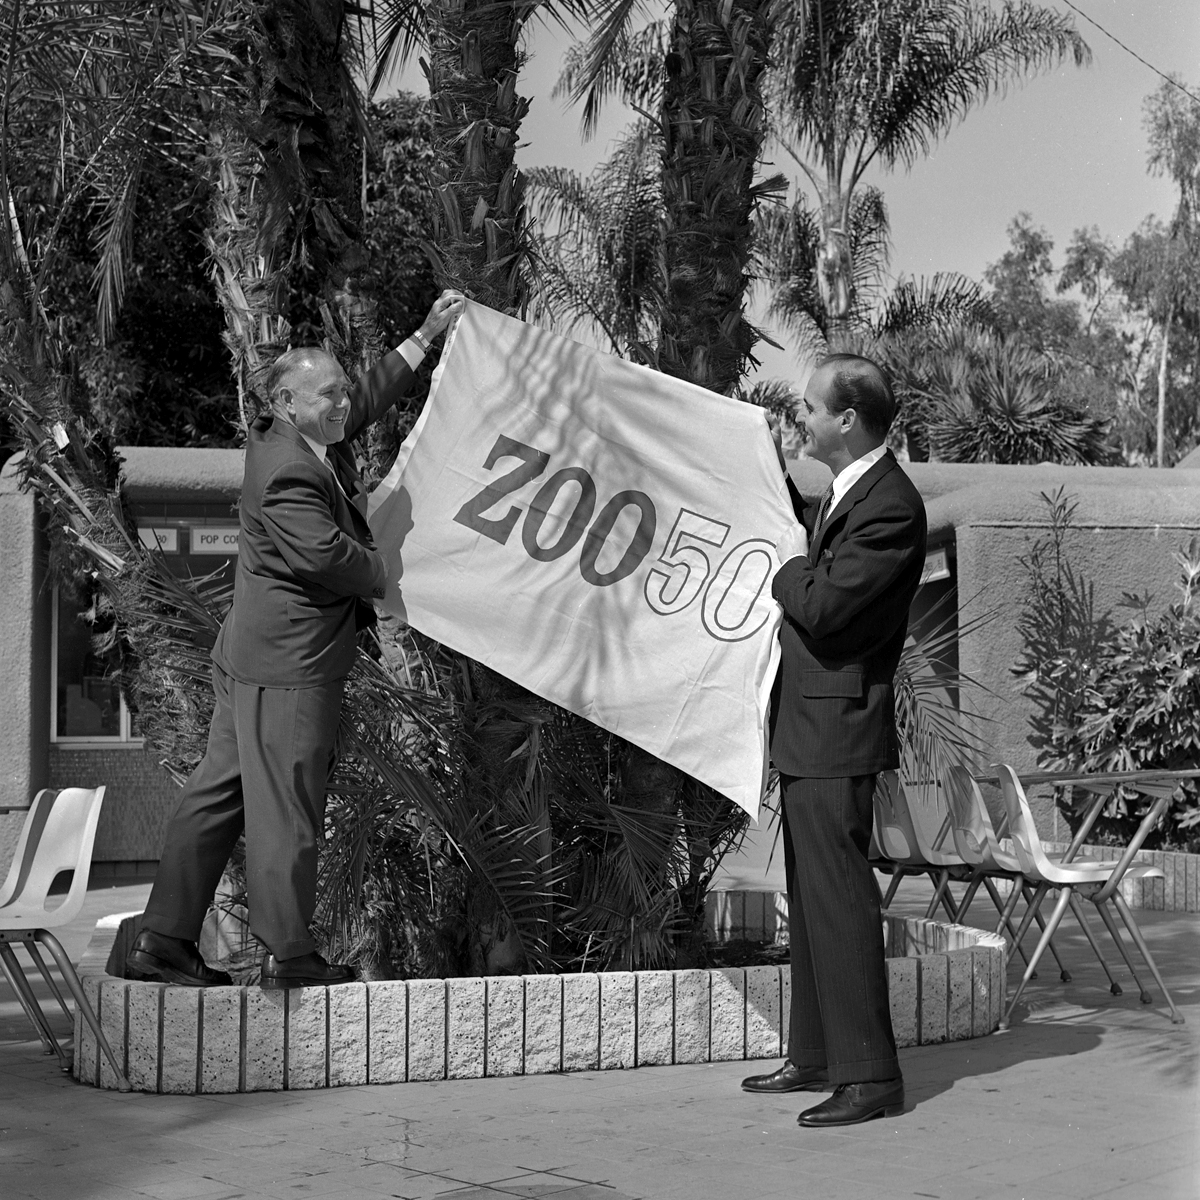 Dr. Schroeder (left) and William Fox, KFMB-TV station manager and chairman of ZOO50 Week, put up signs for the anniversary event, which would include a children's birthday party, a polar bear naming contest, and a Safari Supper for members. Dr. Schroeder and the staff were proud to show off the spic-and-span Zoo, which had been transformed by the new moated enclosures and open mesa exhibits. The outdoor moving sidewalk, Turtletorium, Hummingbird Aviary, and Skyfari were all ideas that Dr. Schroeder had implemented as well. By the Golden Jubilee, the San Diego Zoo had the world’s largest collection of wild animals, and it was looking very different than it had a decade ago.
